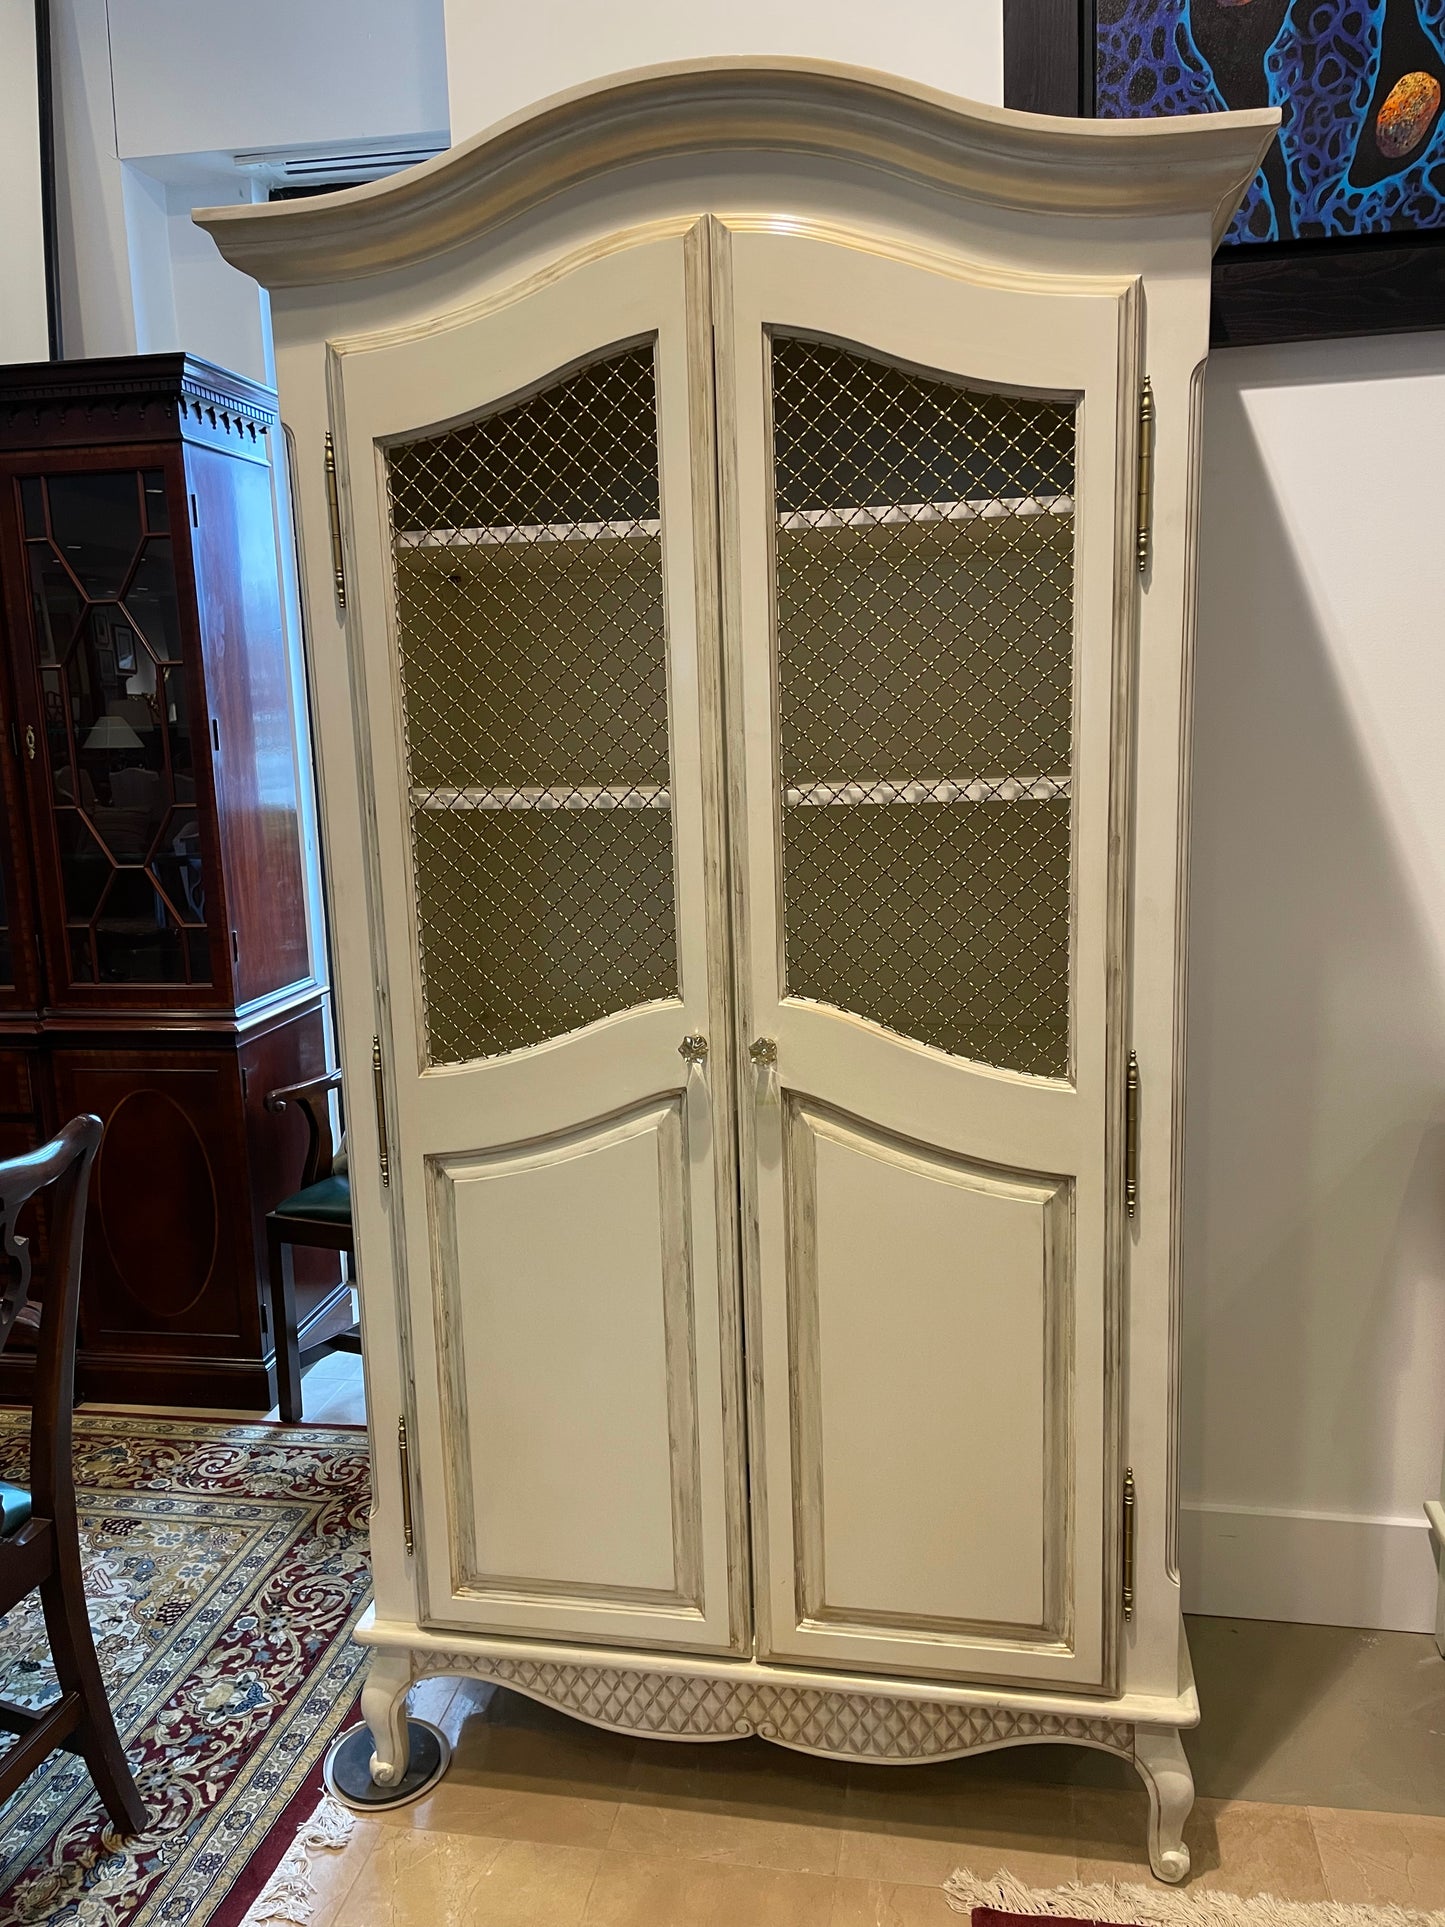 AFK Furniture "Grand Armoire" in Versailles Pink (22802)